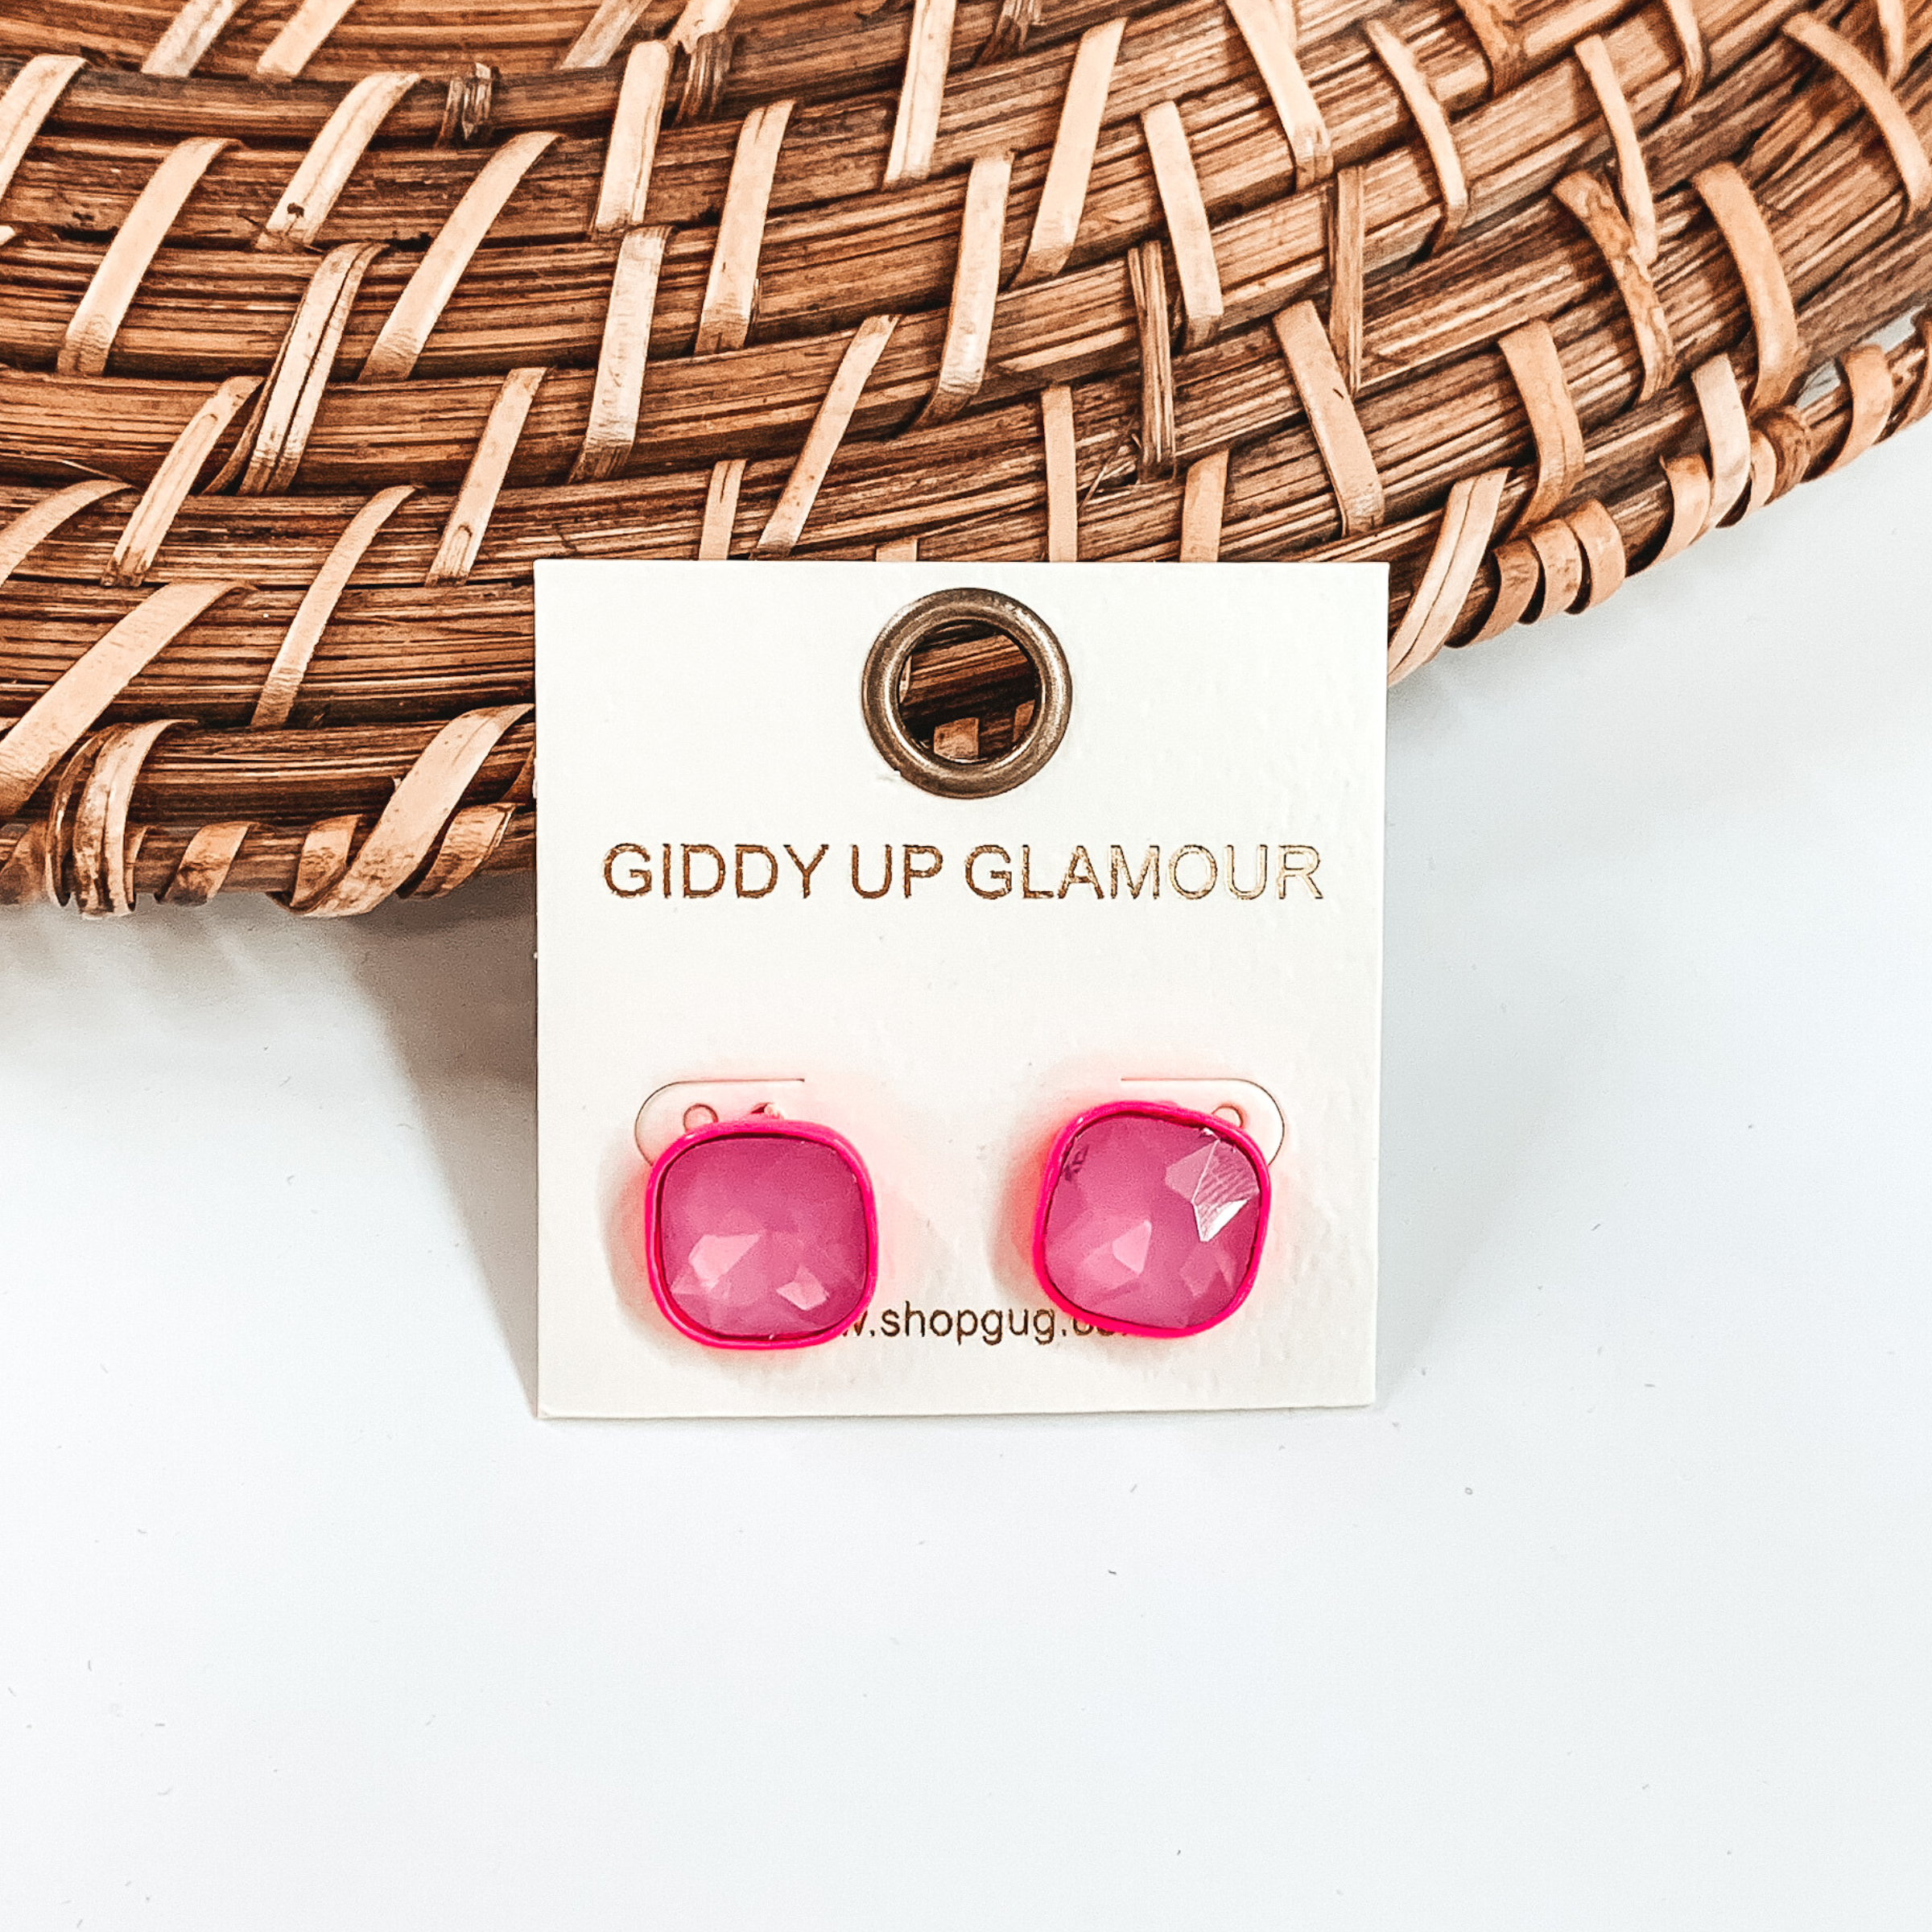 Hot pink, square stud earrings with hot pink colored crystals. These earrings are pictured on a white GUG earrings holder on a white background with brown basket weave material behind the earrings. 